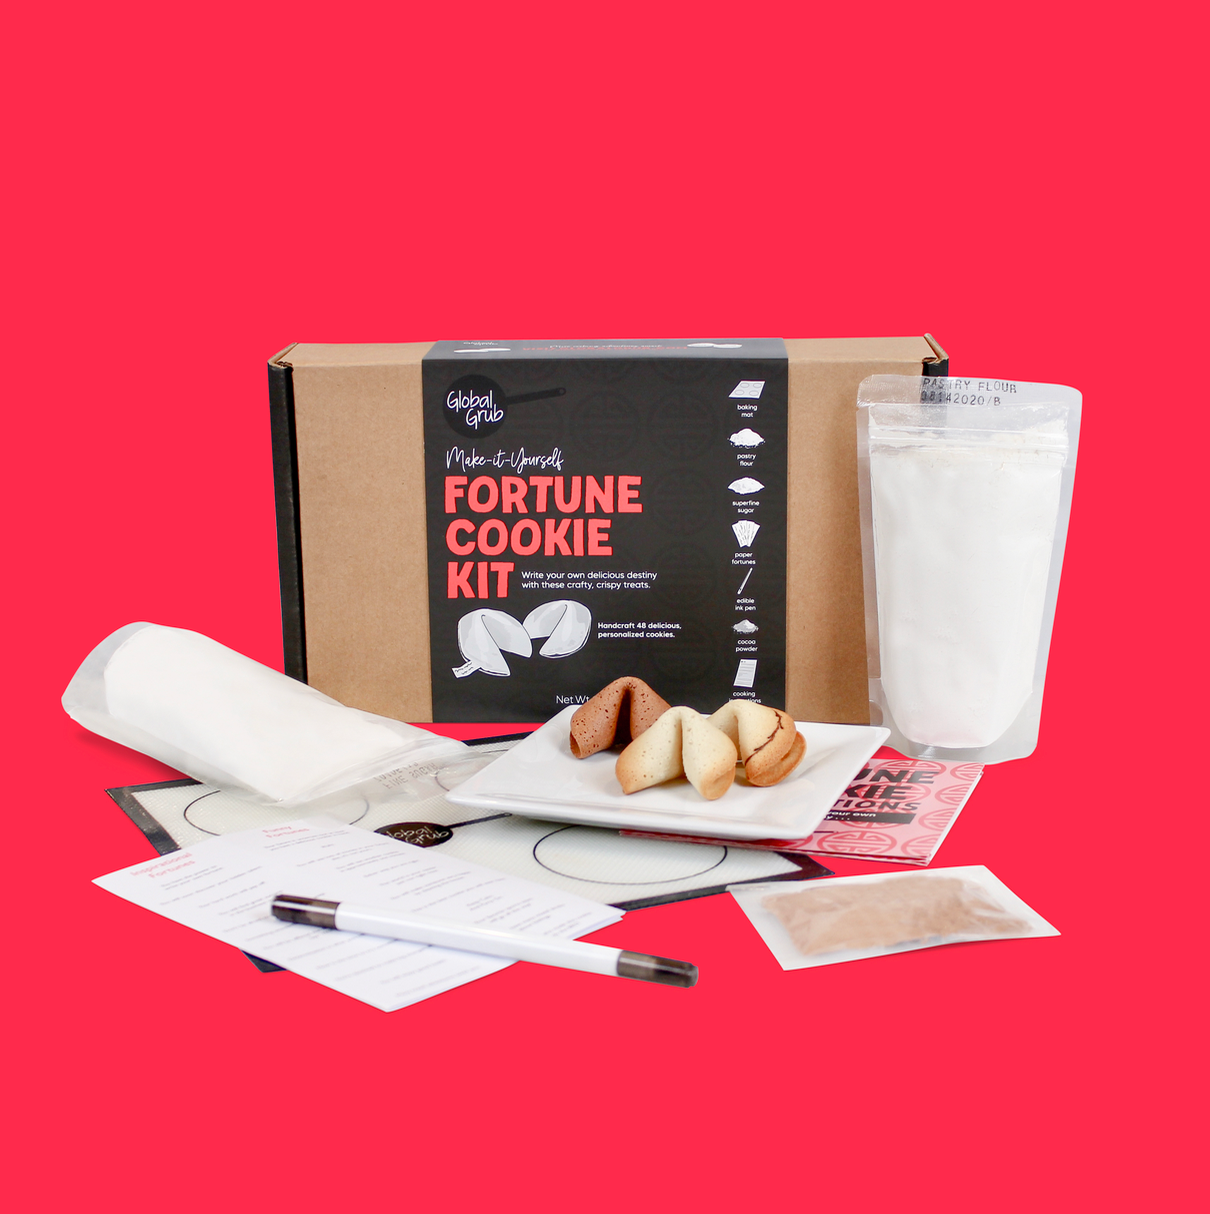 Fortune Cookie Kit includes pastry flour, superfine sugar, cocoa, edible ink pen, baking mat and cooking instructions